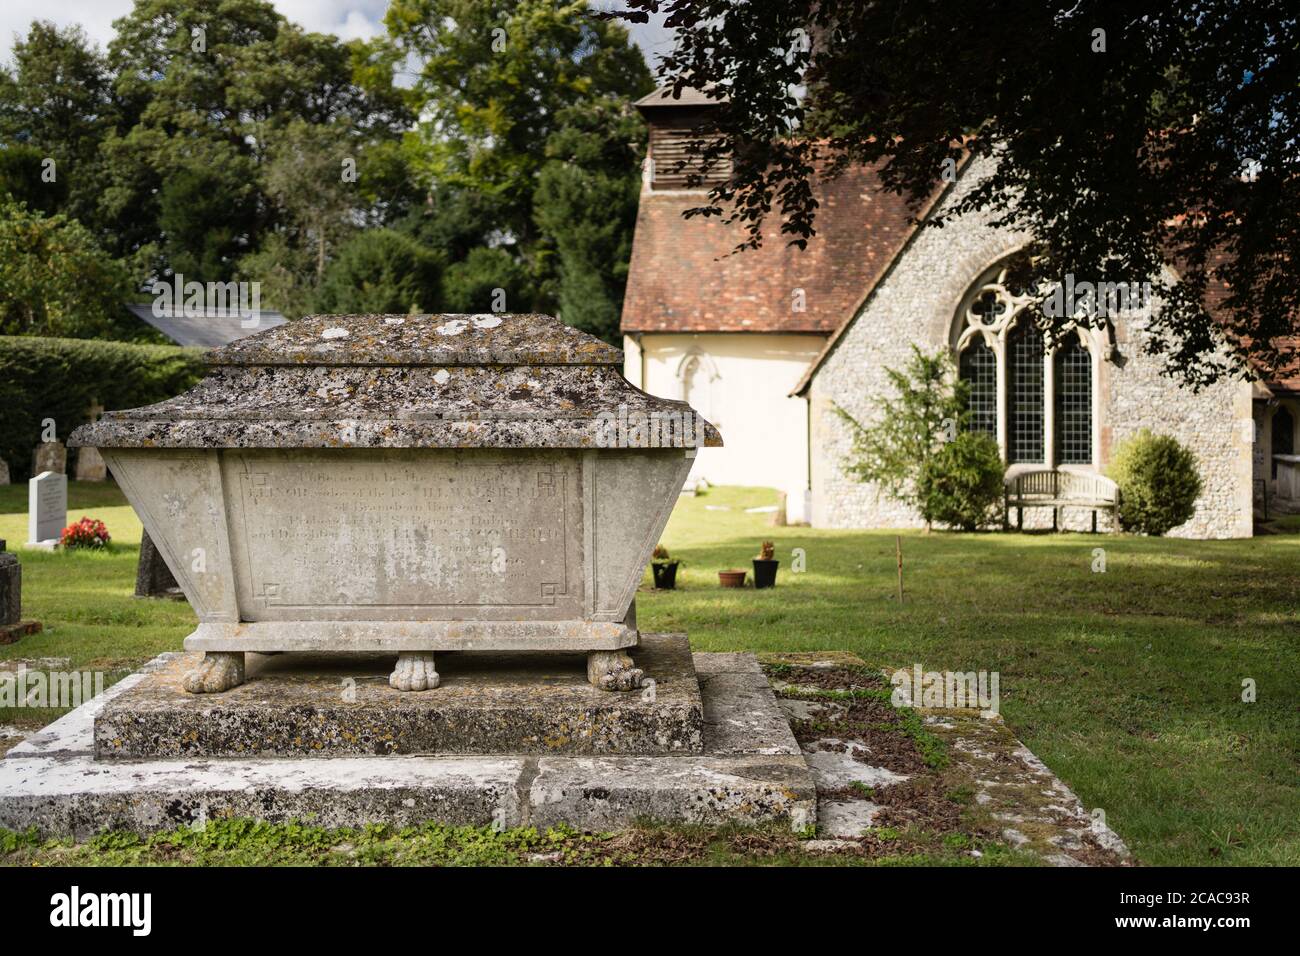 The churchyard and graveyard of St Simon and St Jude church in Bramdean Hampshire UK Stock Photo